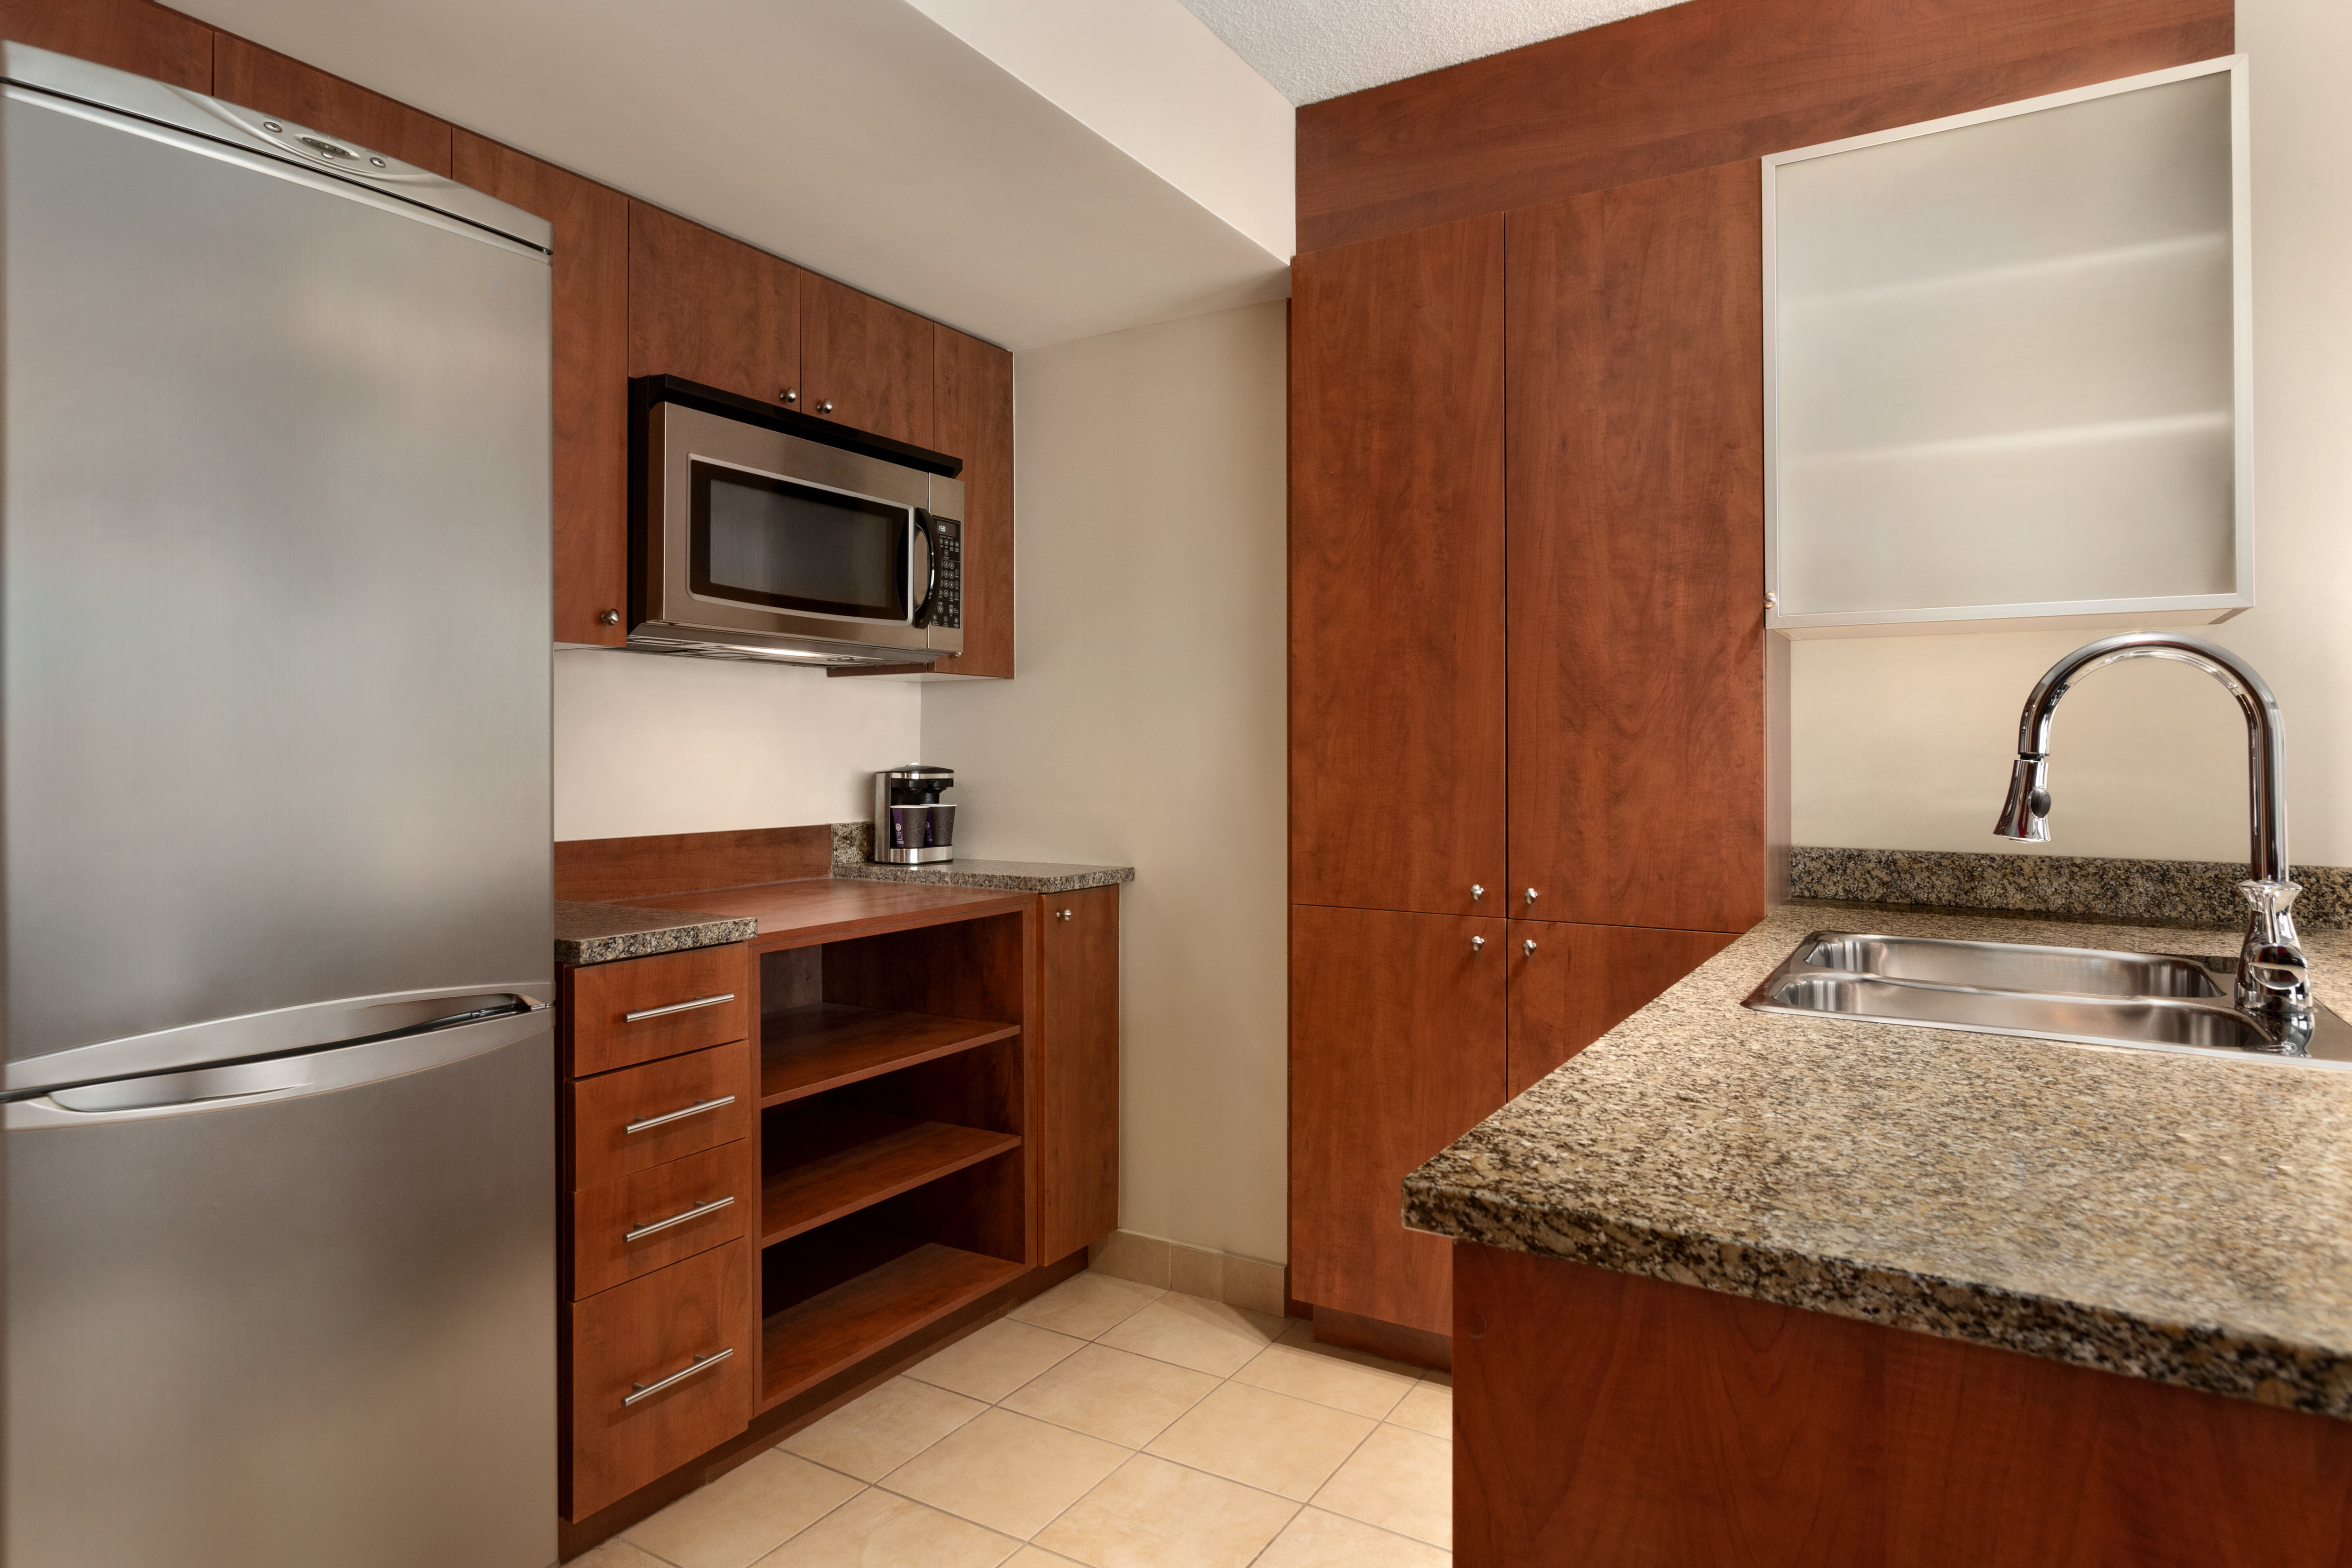 Kitchen Area with Stainless Appliances in a Hotel Suite